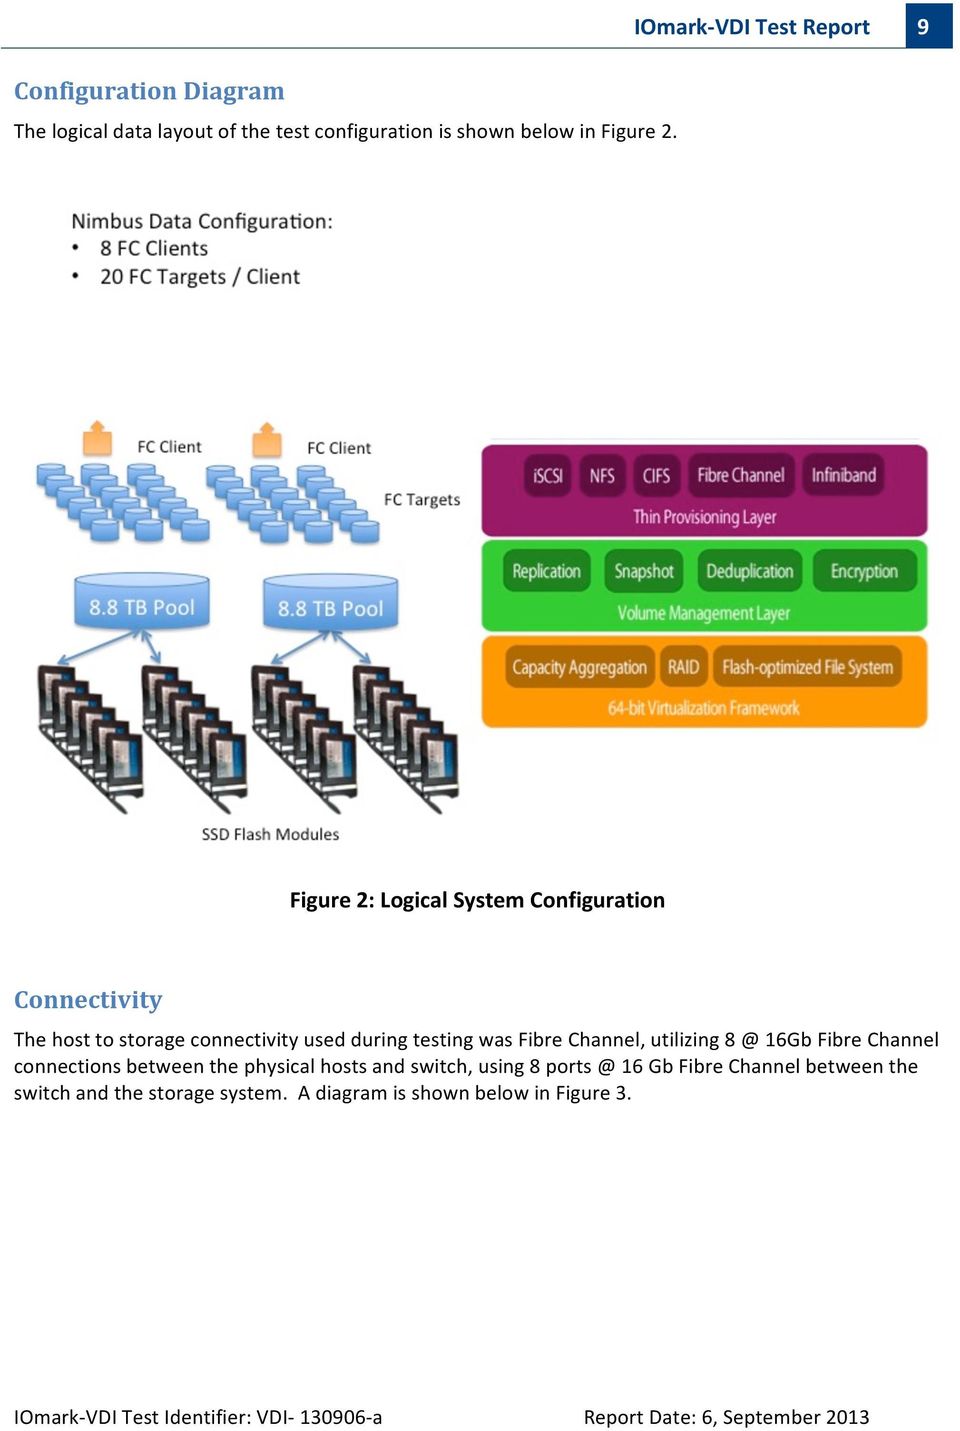 Channel, utilizing 8 @ 16Gb Fibre Channel connections between the physical hosts and switch, using 8 ports @ 16 Gb Fibre